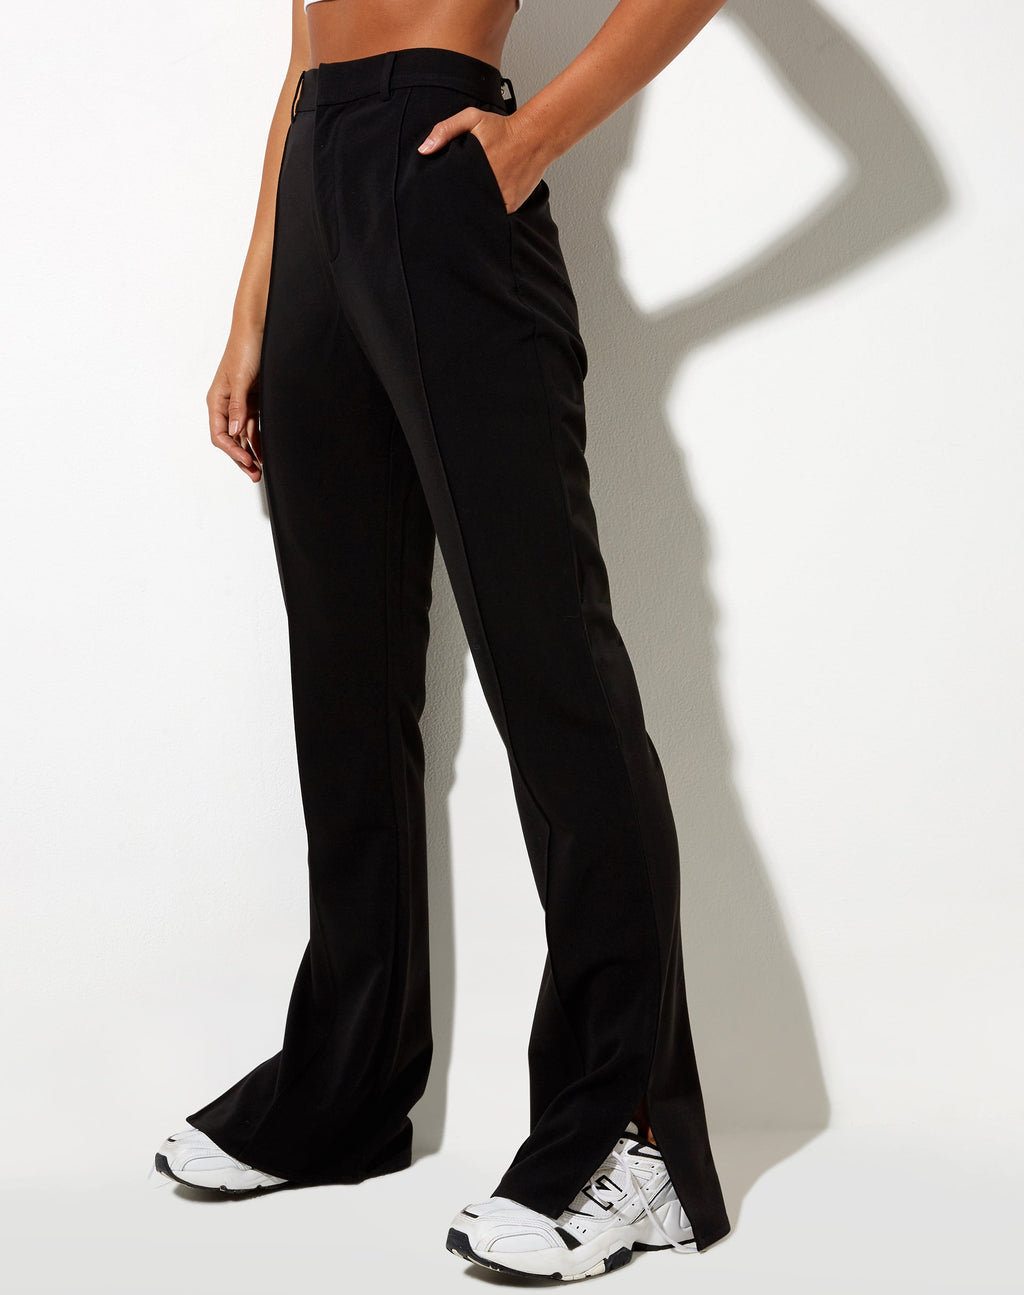 Zovey Flare Trouser in Black